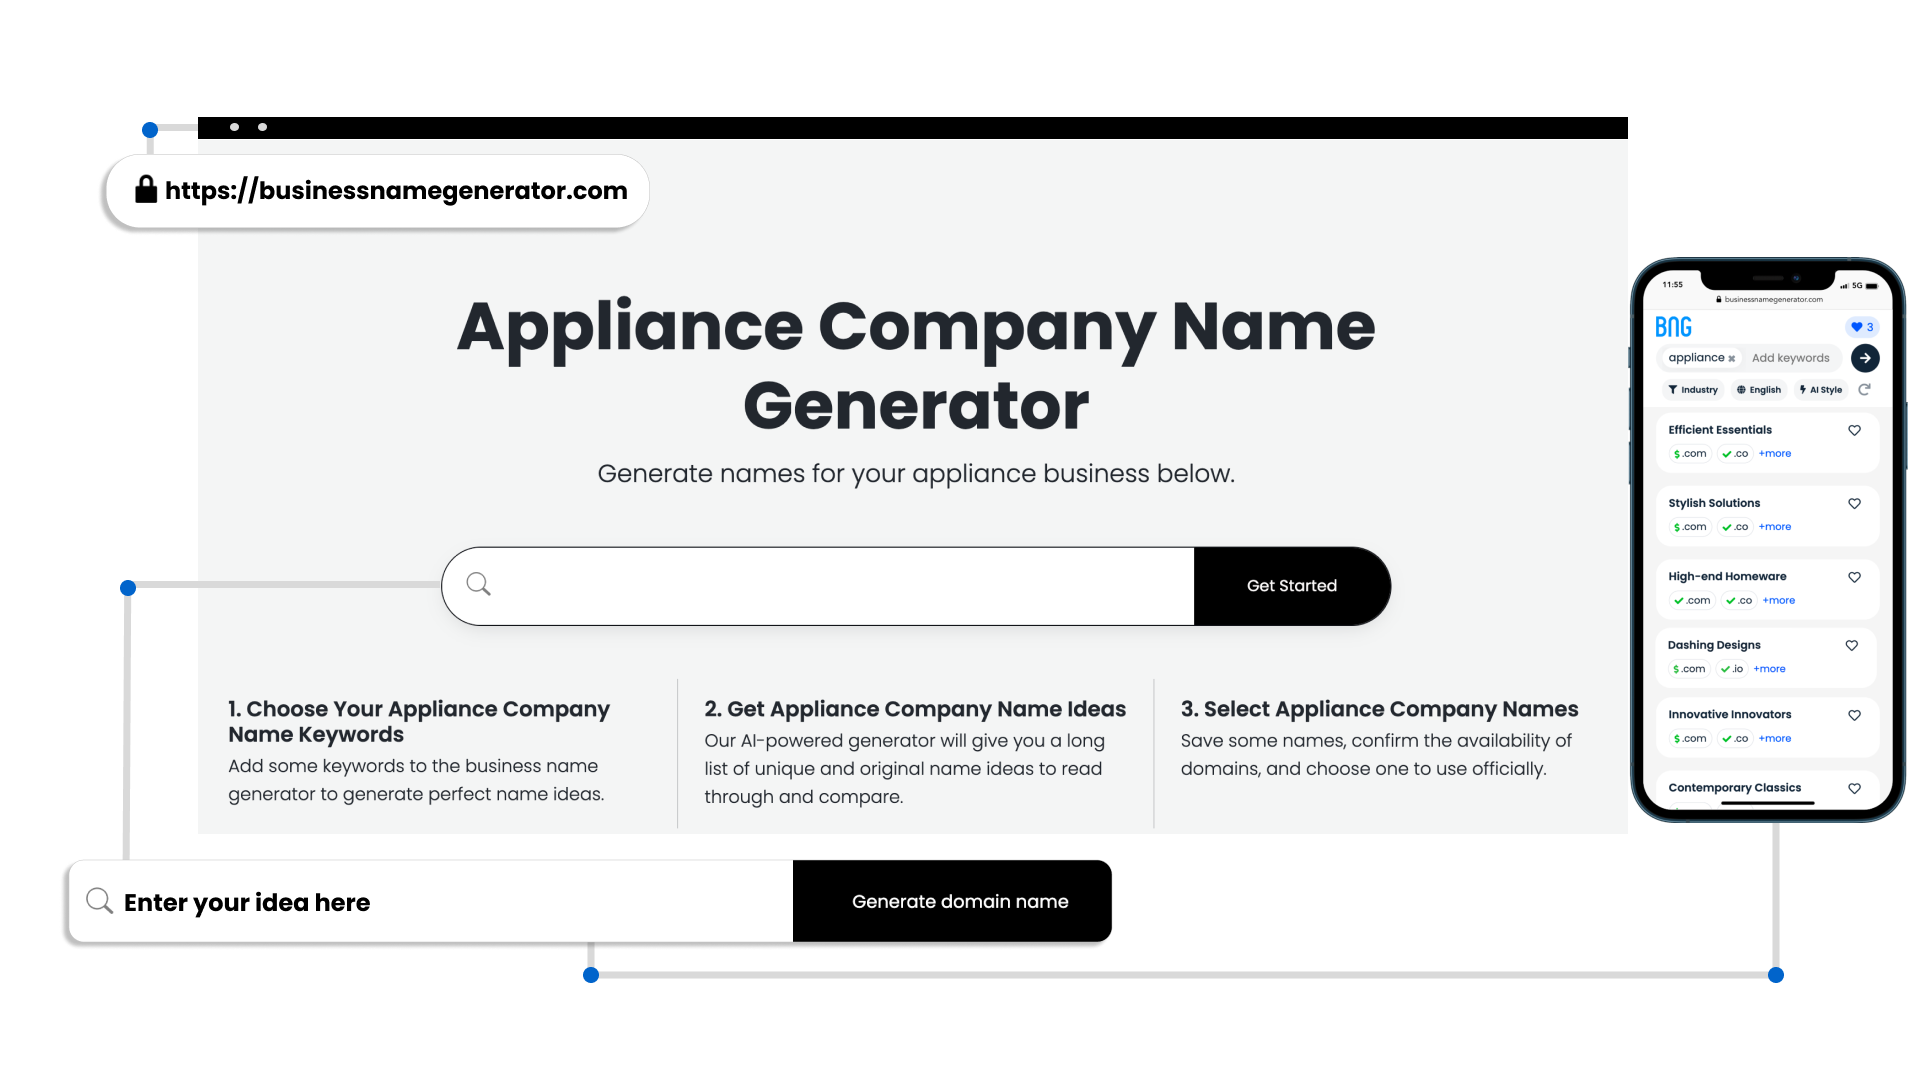 Benefits of Our Appliance Company Name Generator